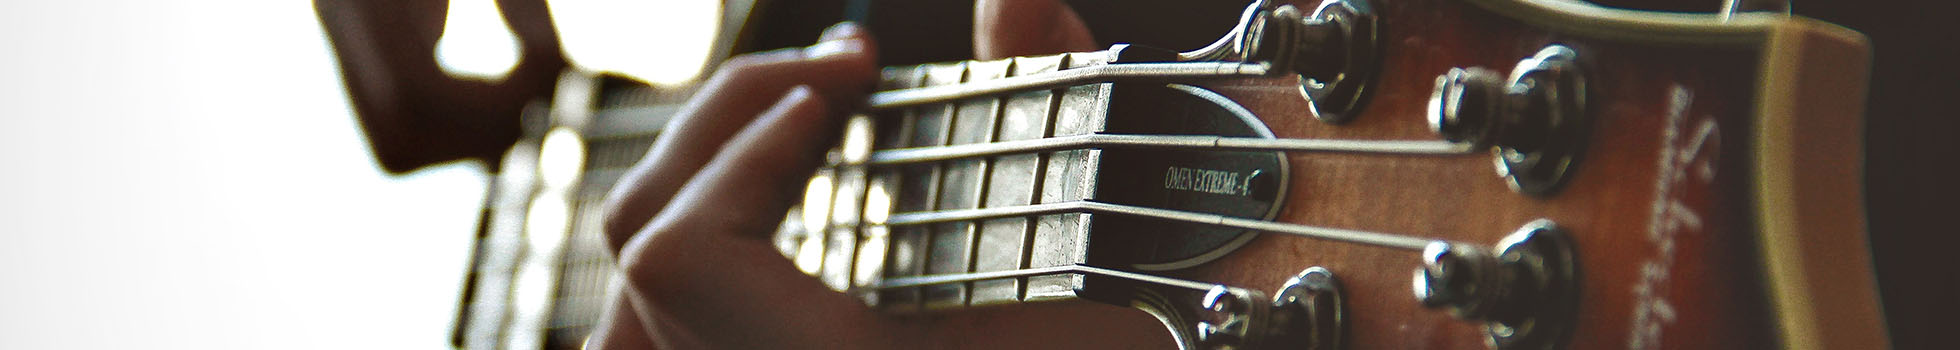 Close up of someone playing a guitar